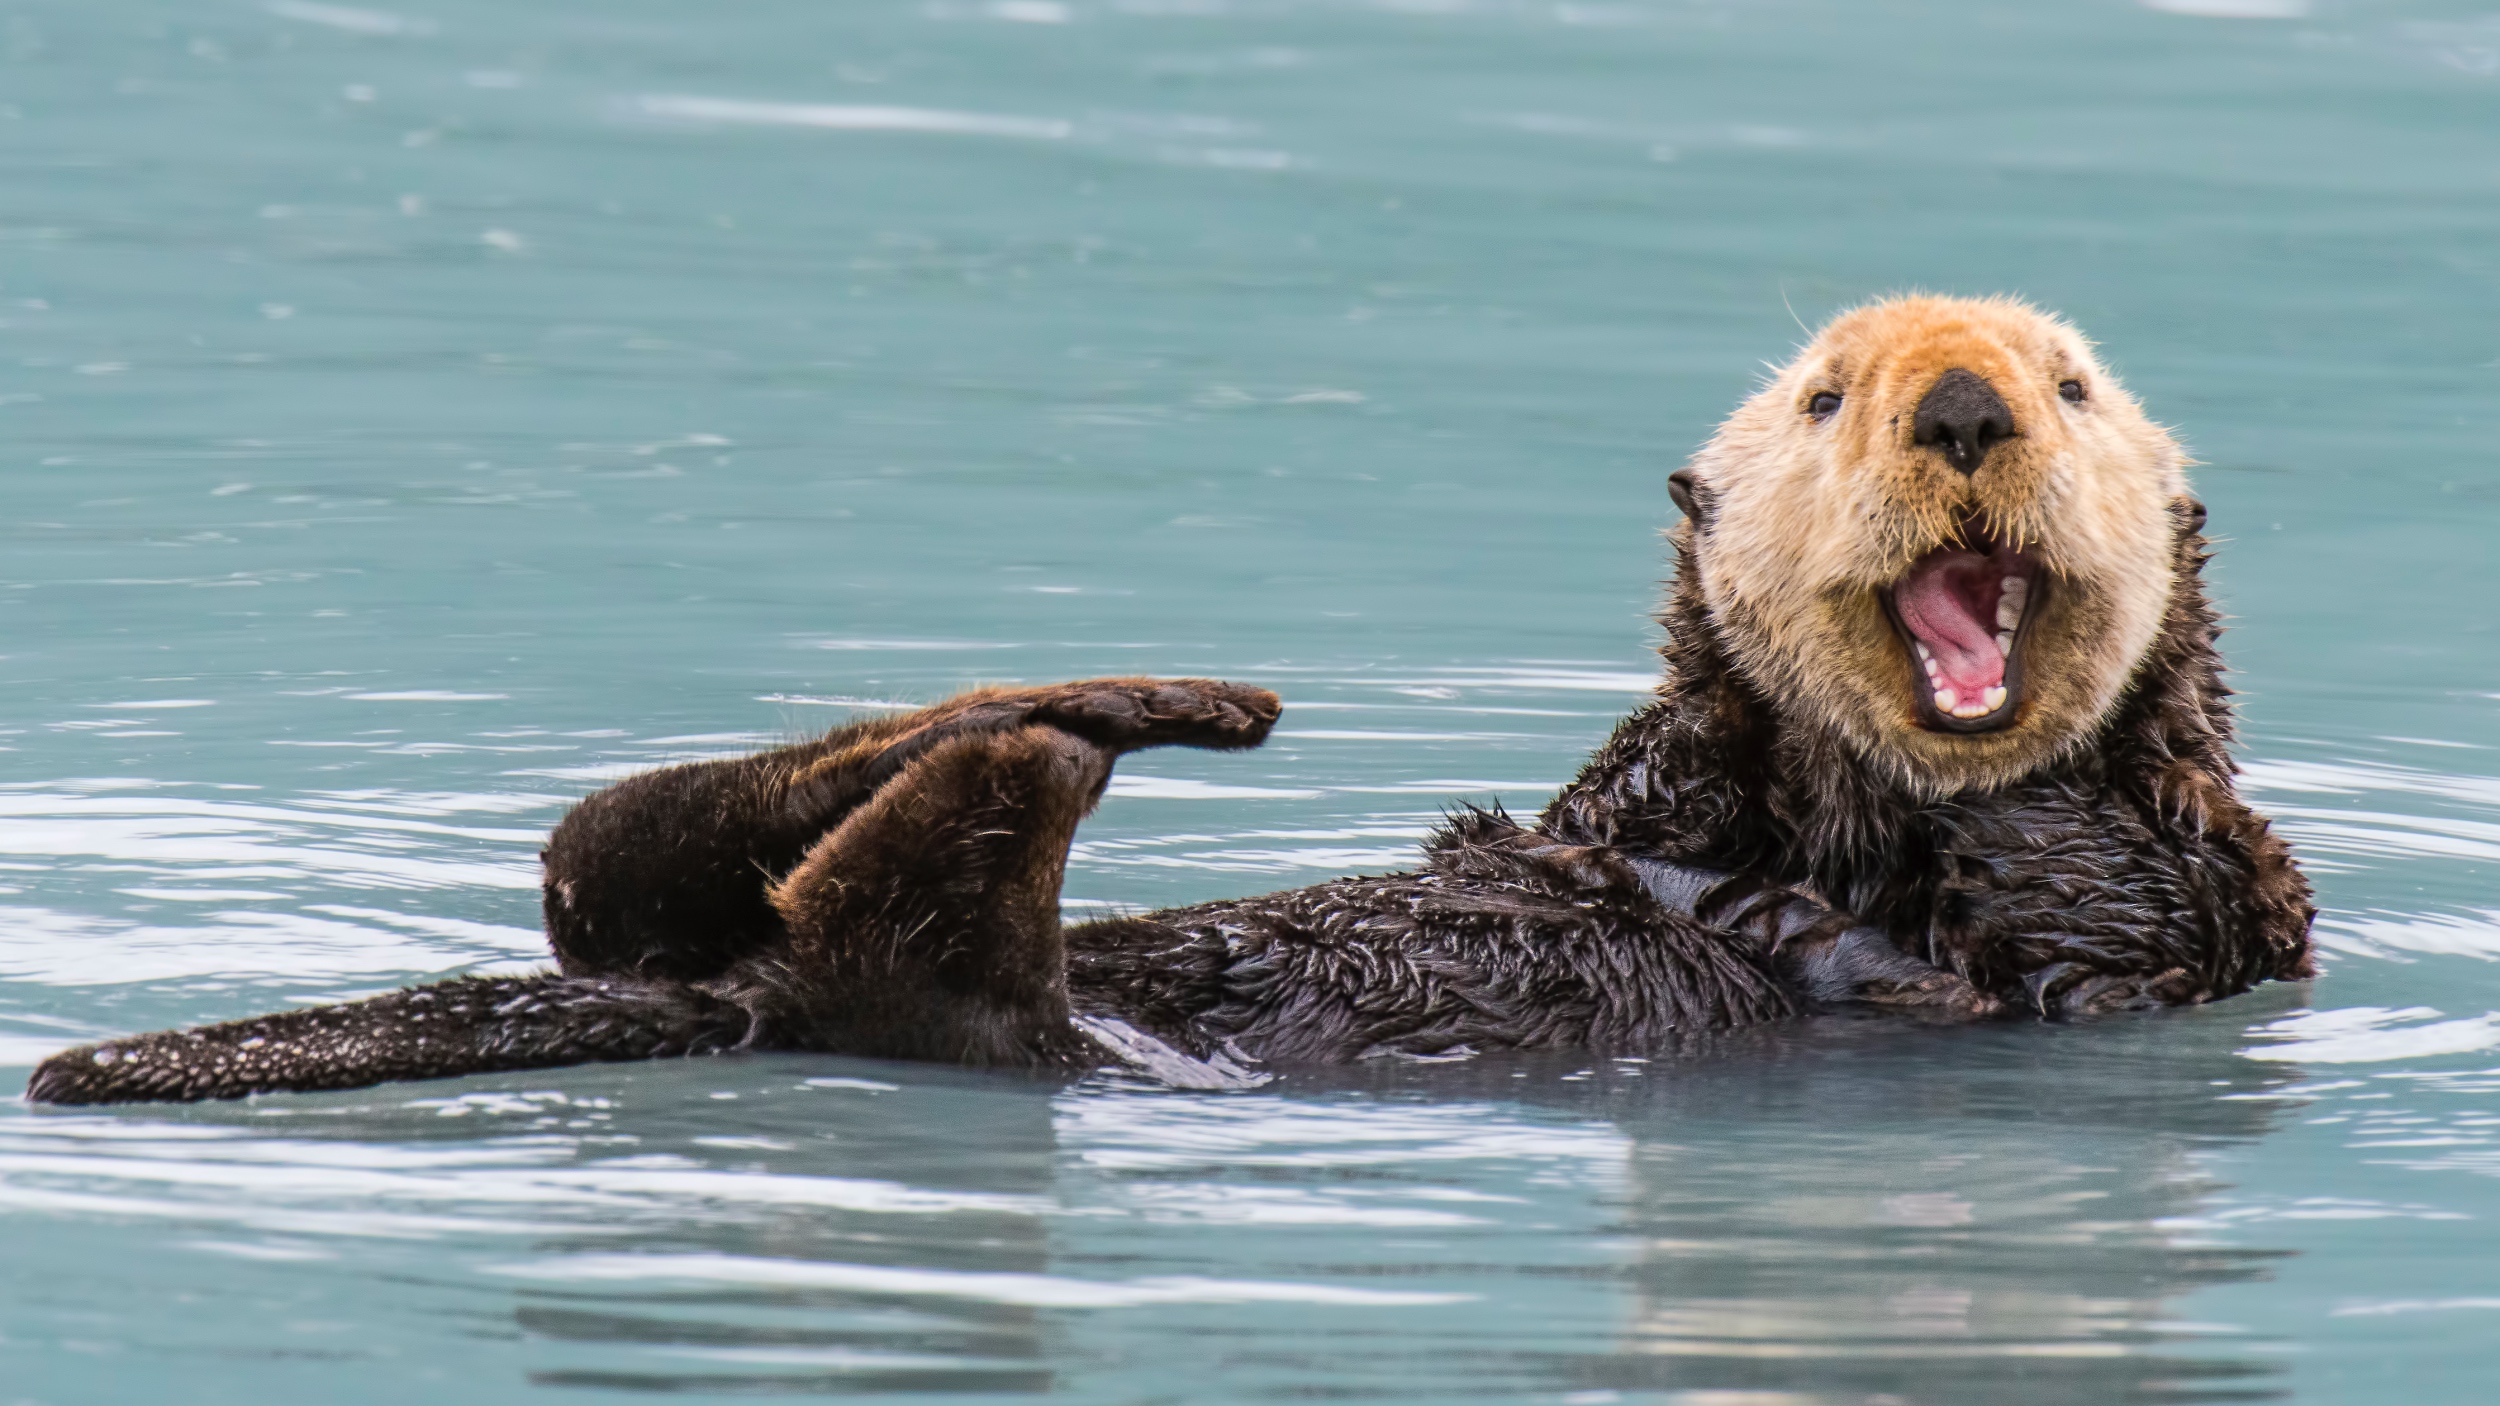 California sea otter in the water